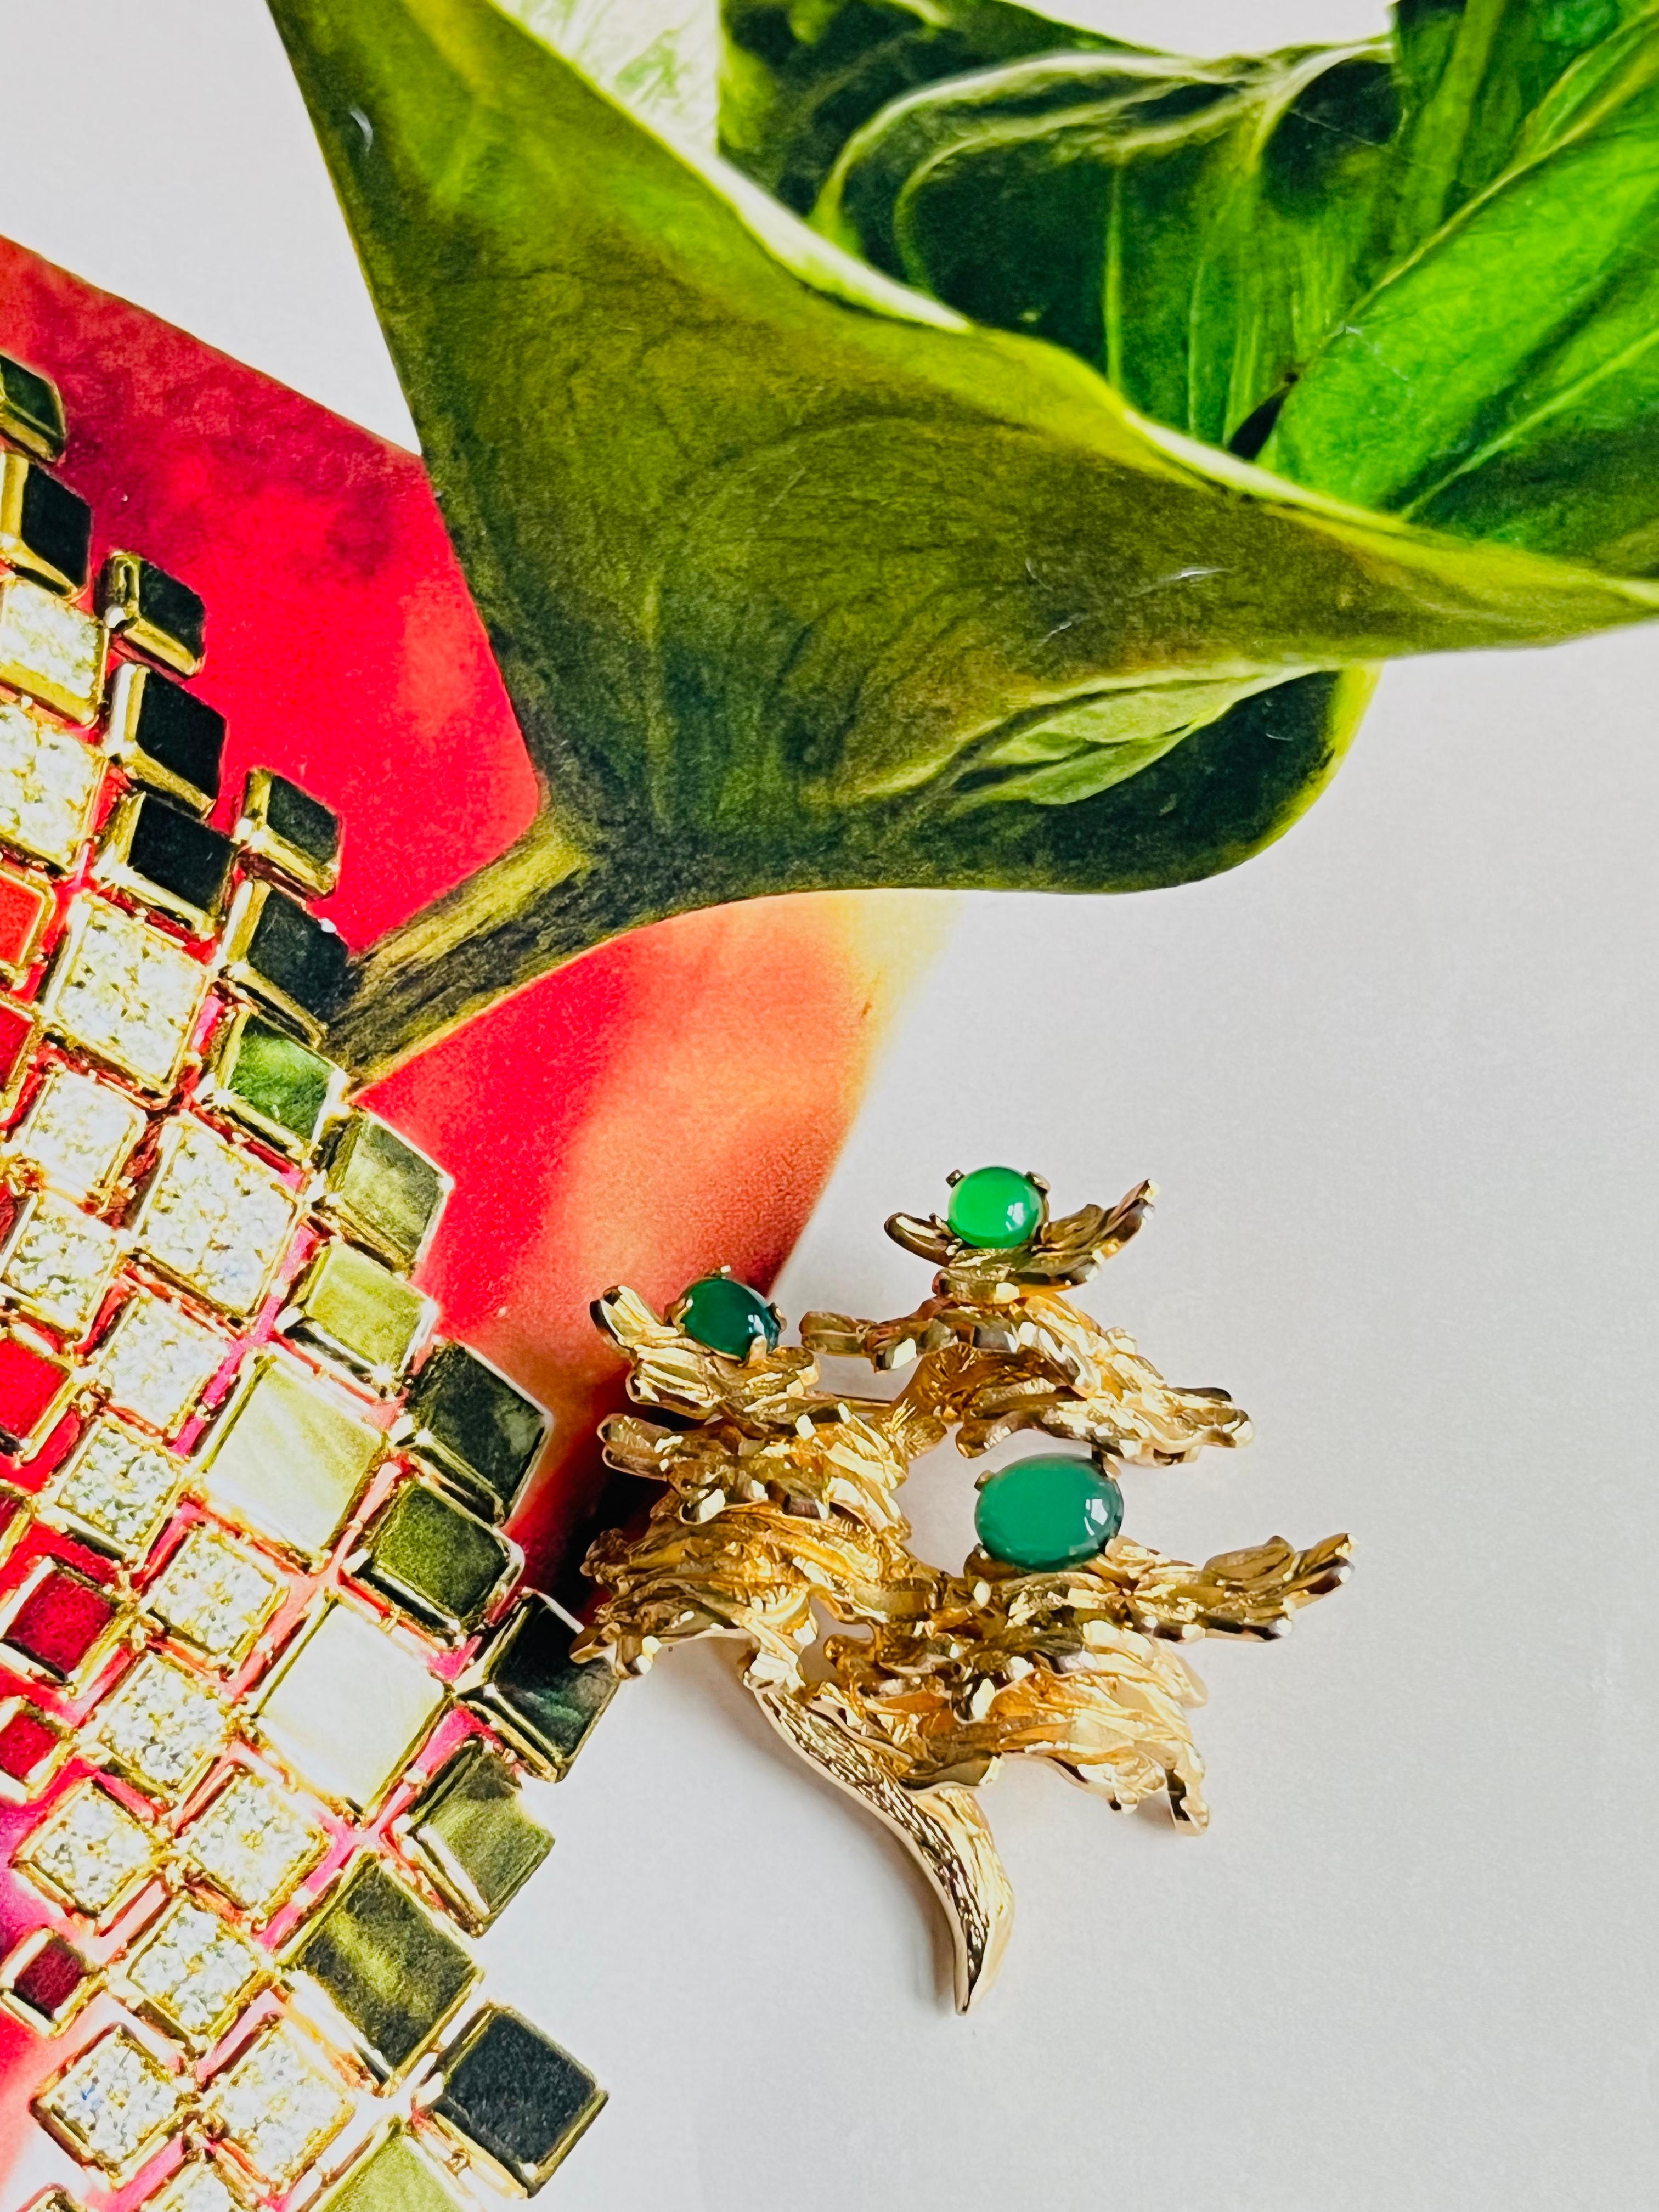 Christian Dior GROSSE 1966 Vintage Emerald Jade Green Flower Leaf Tree Brooch, Gold Tone

Very good condition. Signed at the rear. 100% Genuine.

Material: Gold plated metal, Stones.

Size: 4.5 cm x 4.4 cm.

Weight: 16.0 g.

_ _ _

Great for